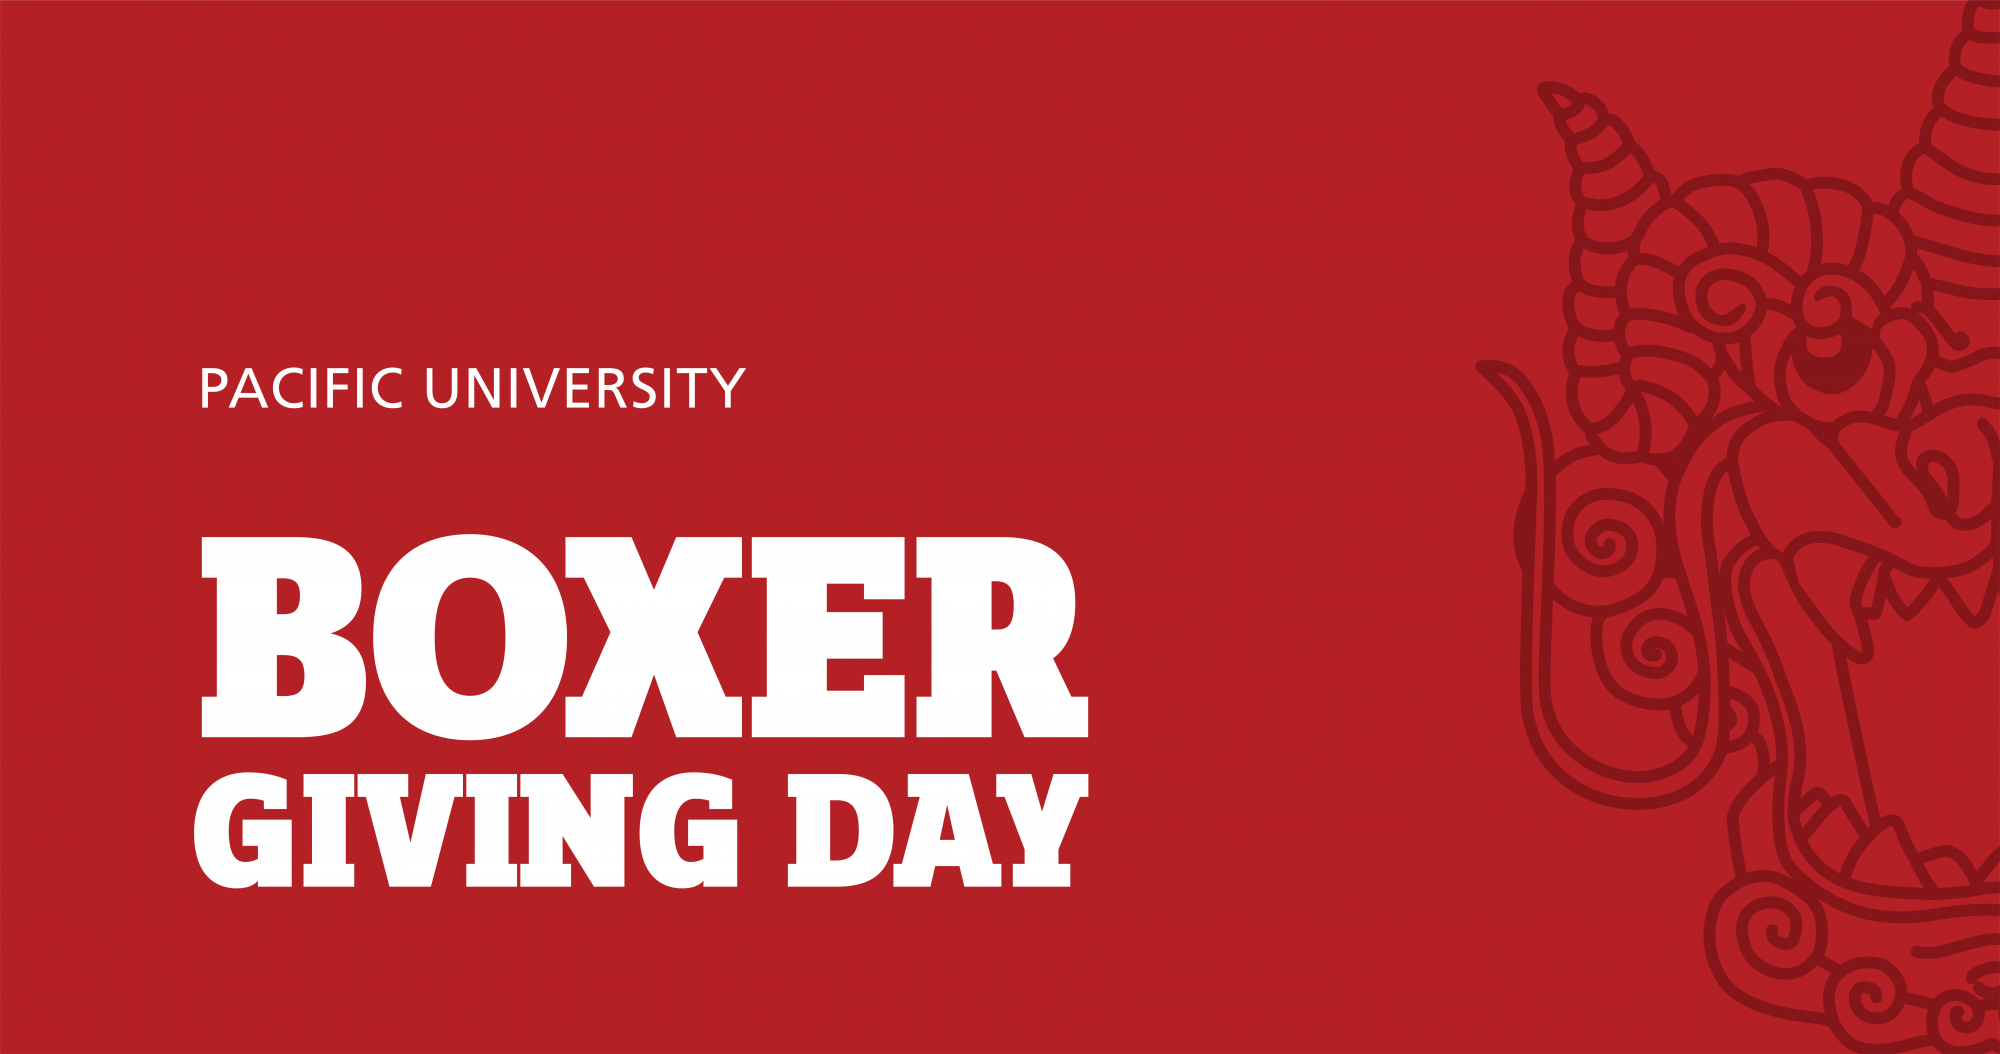 Make a gift and impact a student's life on Boxer Giving Day